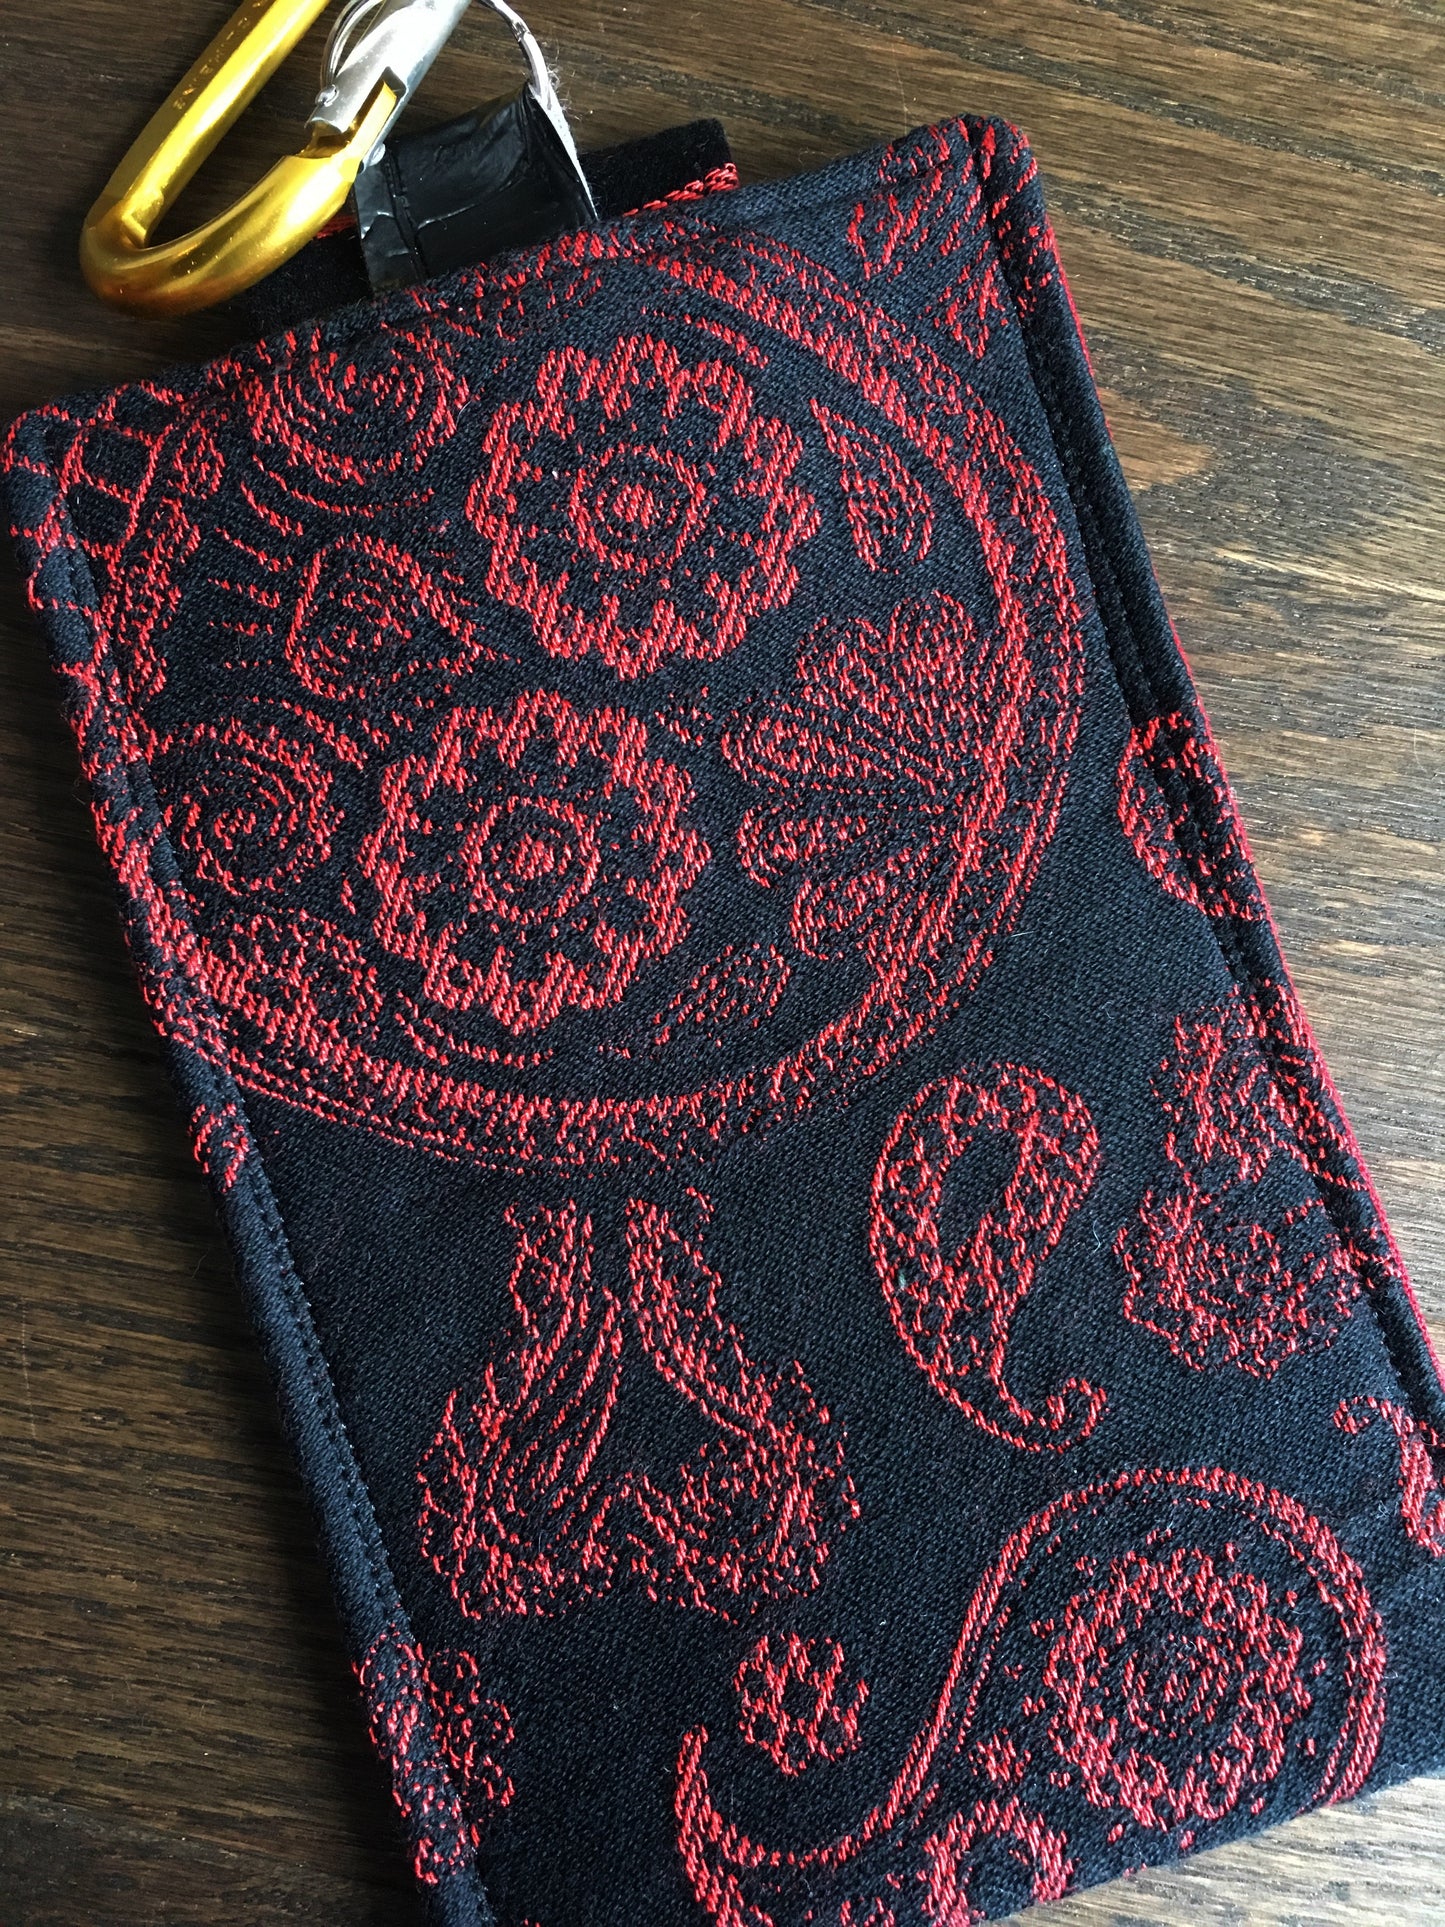 Image of a handmade and pirate themed phone pouch. It features skelewag fabric from Alexander Henry, bold red and black skull and crossbones woven jacquard fabric, an internal card pocket, and a belt or purse clip. 